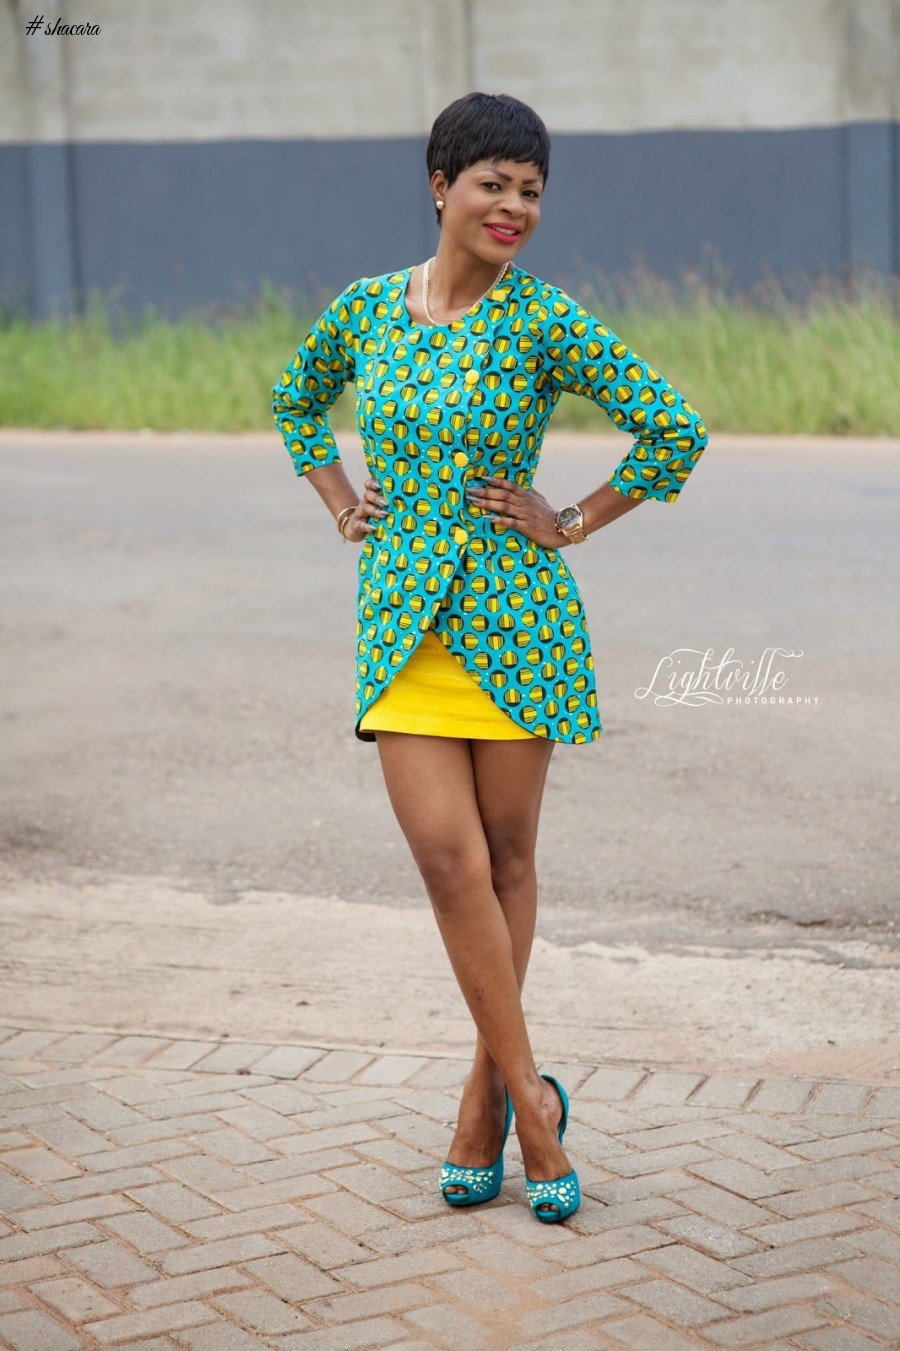 MORE ANKARA STREET STYLES FOR YOU TO SEE